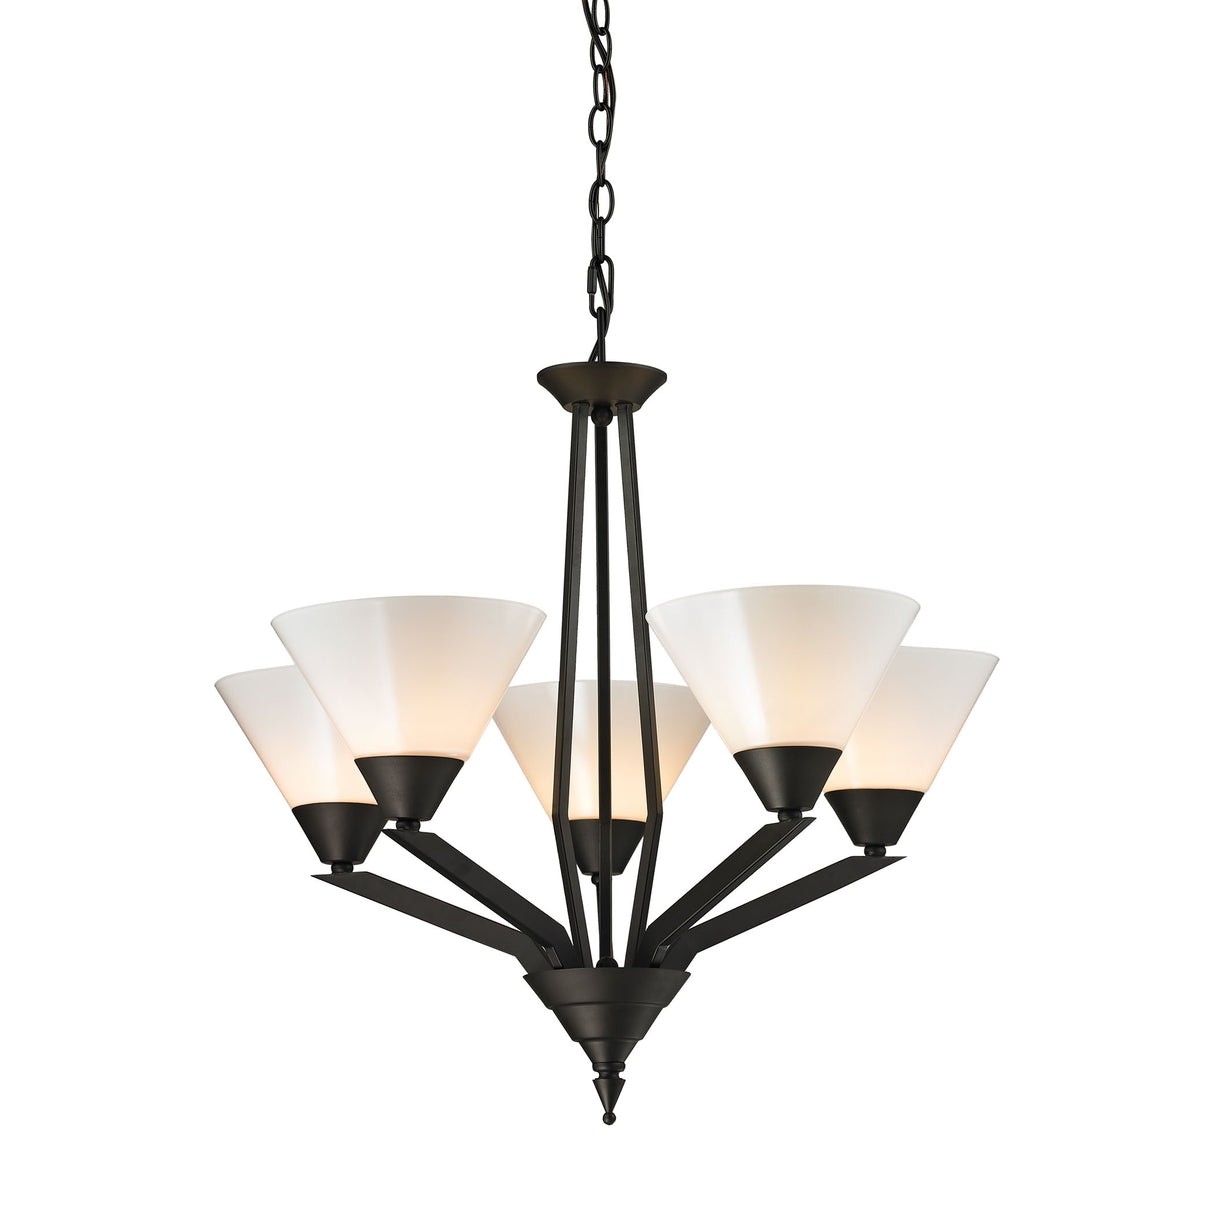 Elk 2455CH/10 Tribecca 5-Light Chandelier in Oil Rubbed Bronze with White Glass